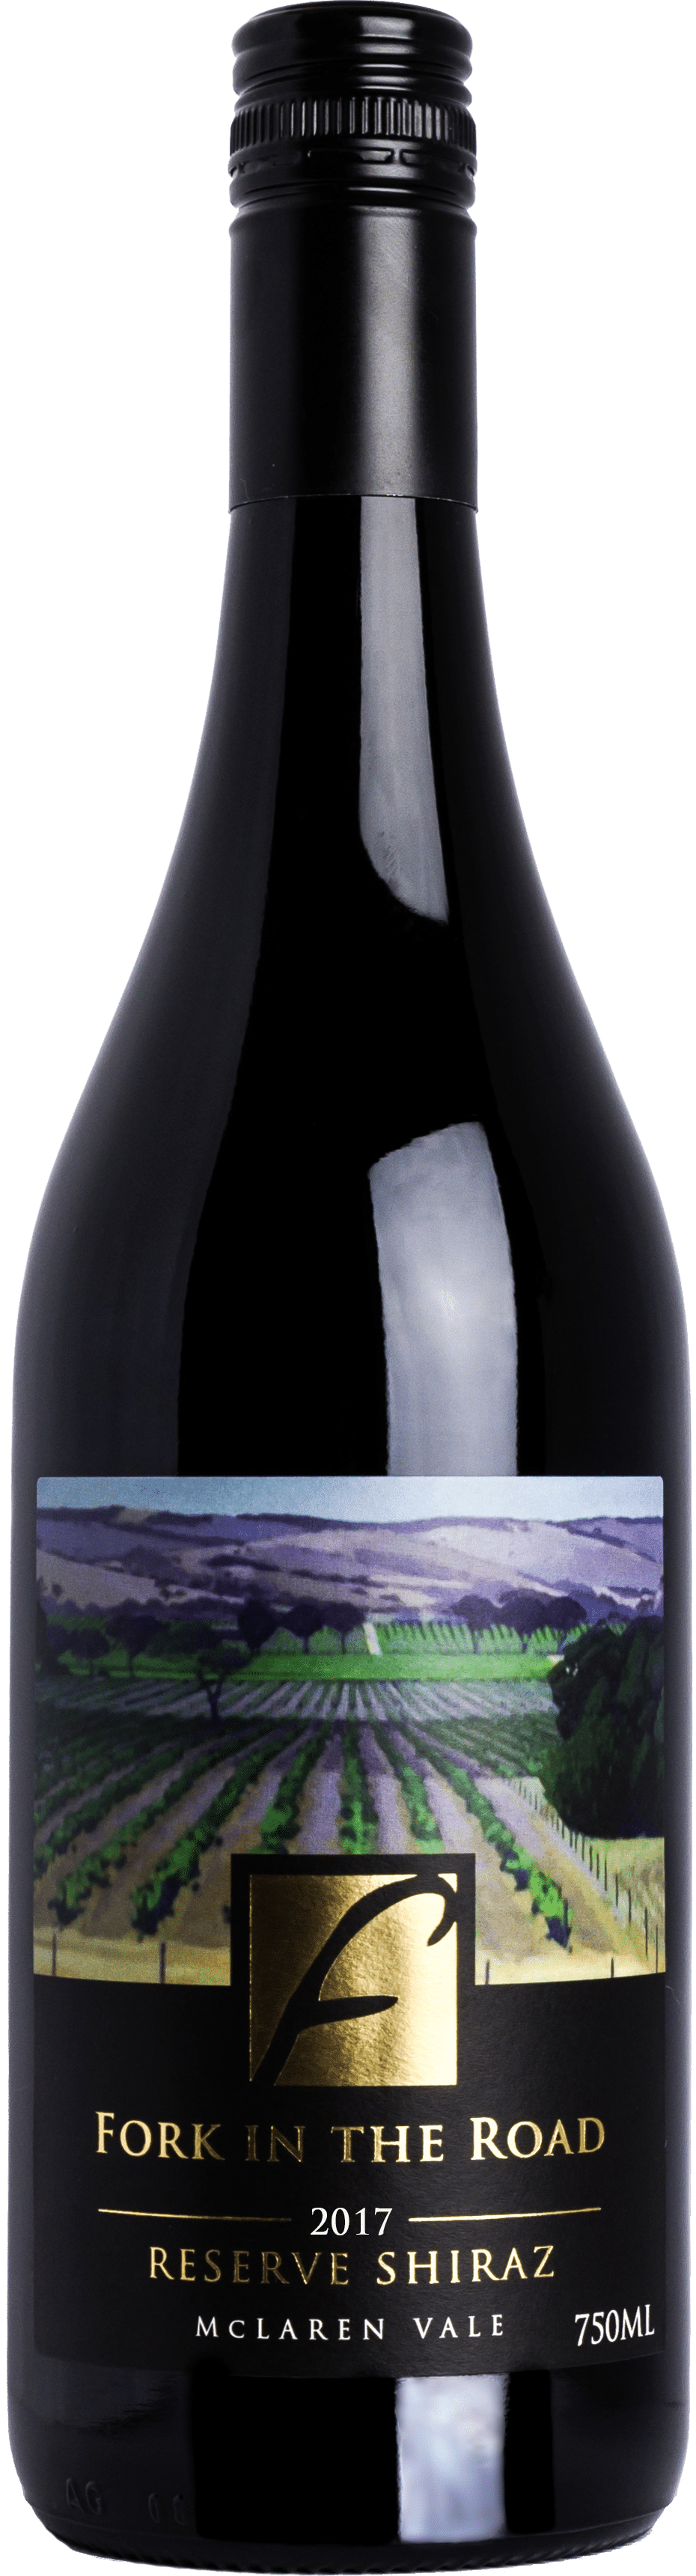 Fork In The Road Reserve Shiraz 2017